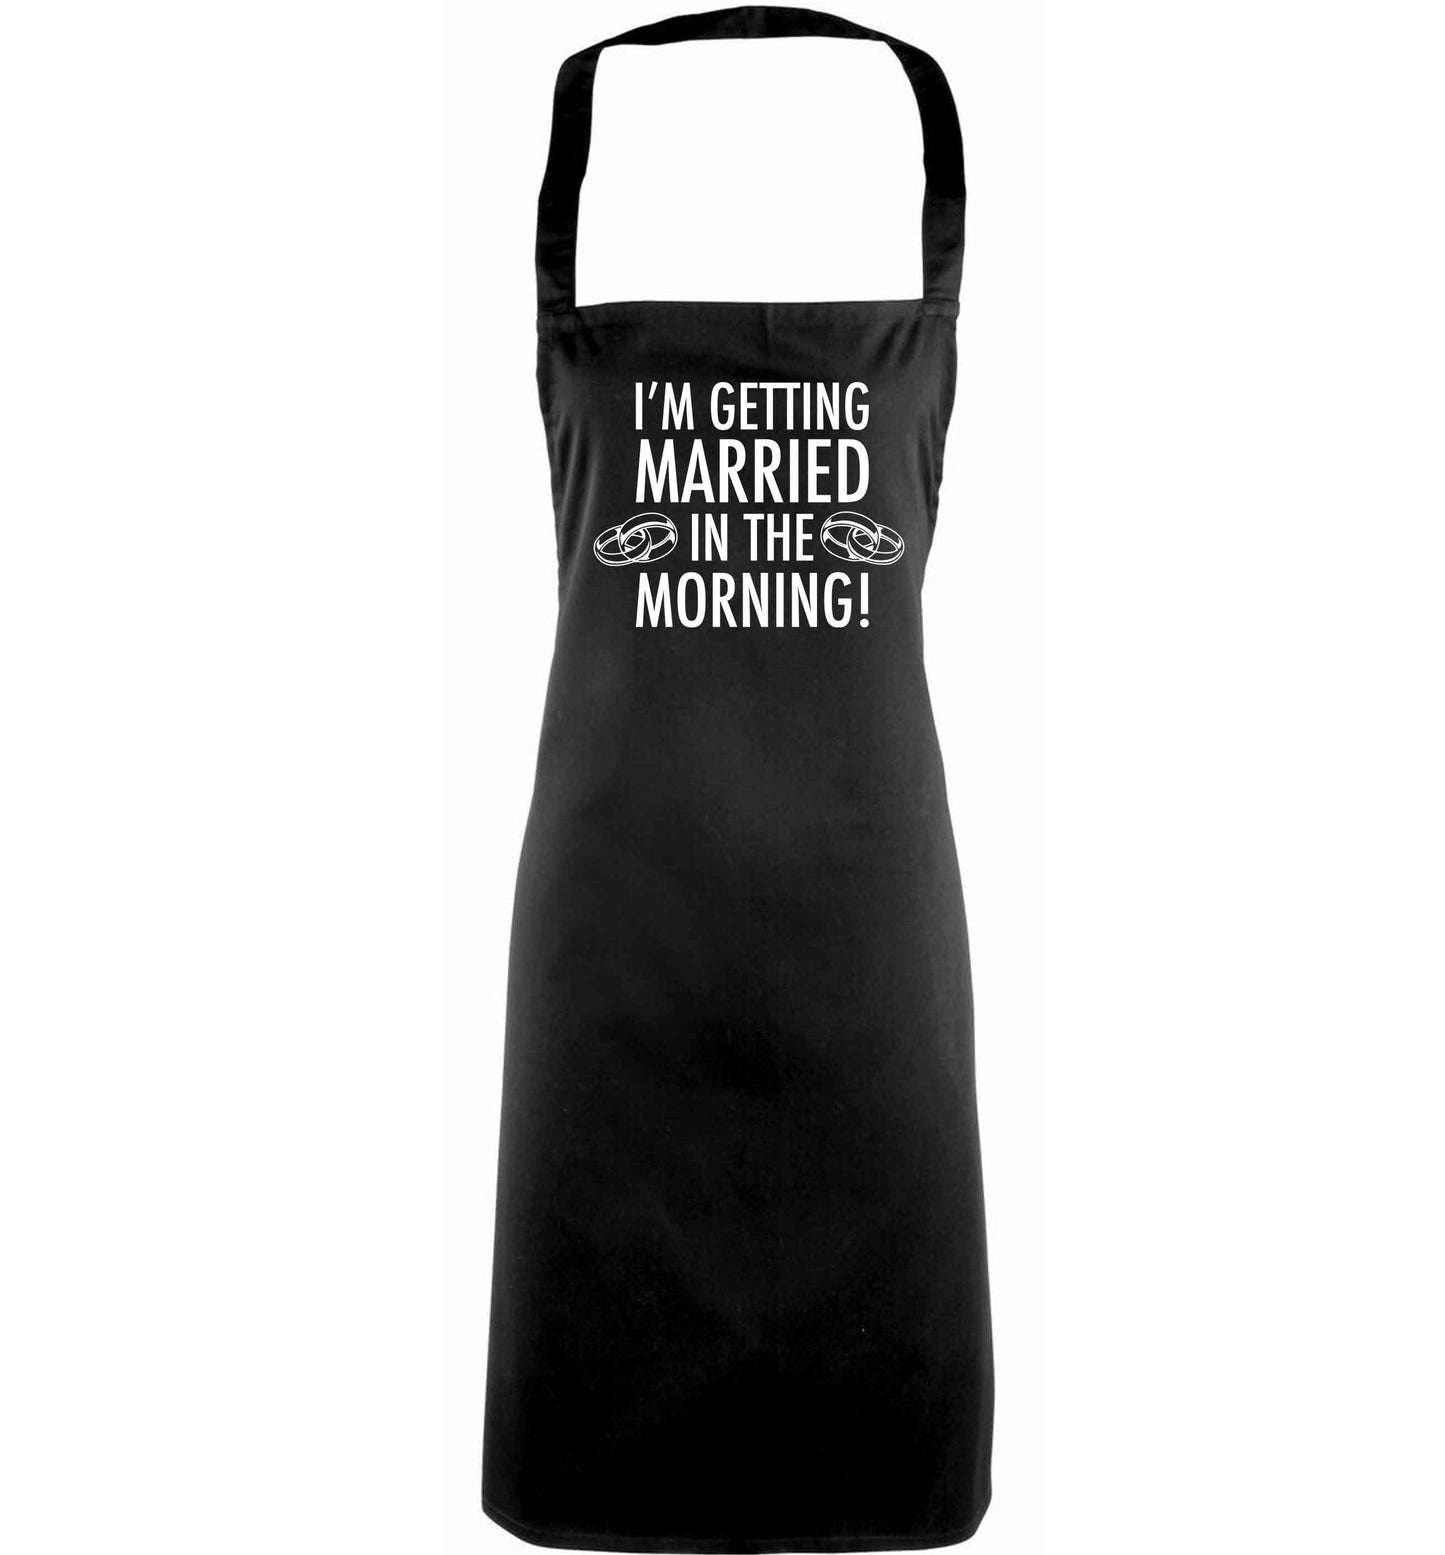 I'm getting married in the morning! adults black apron